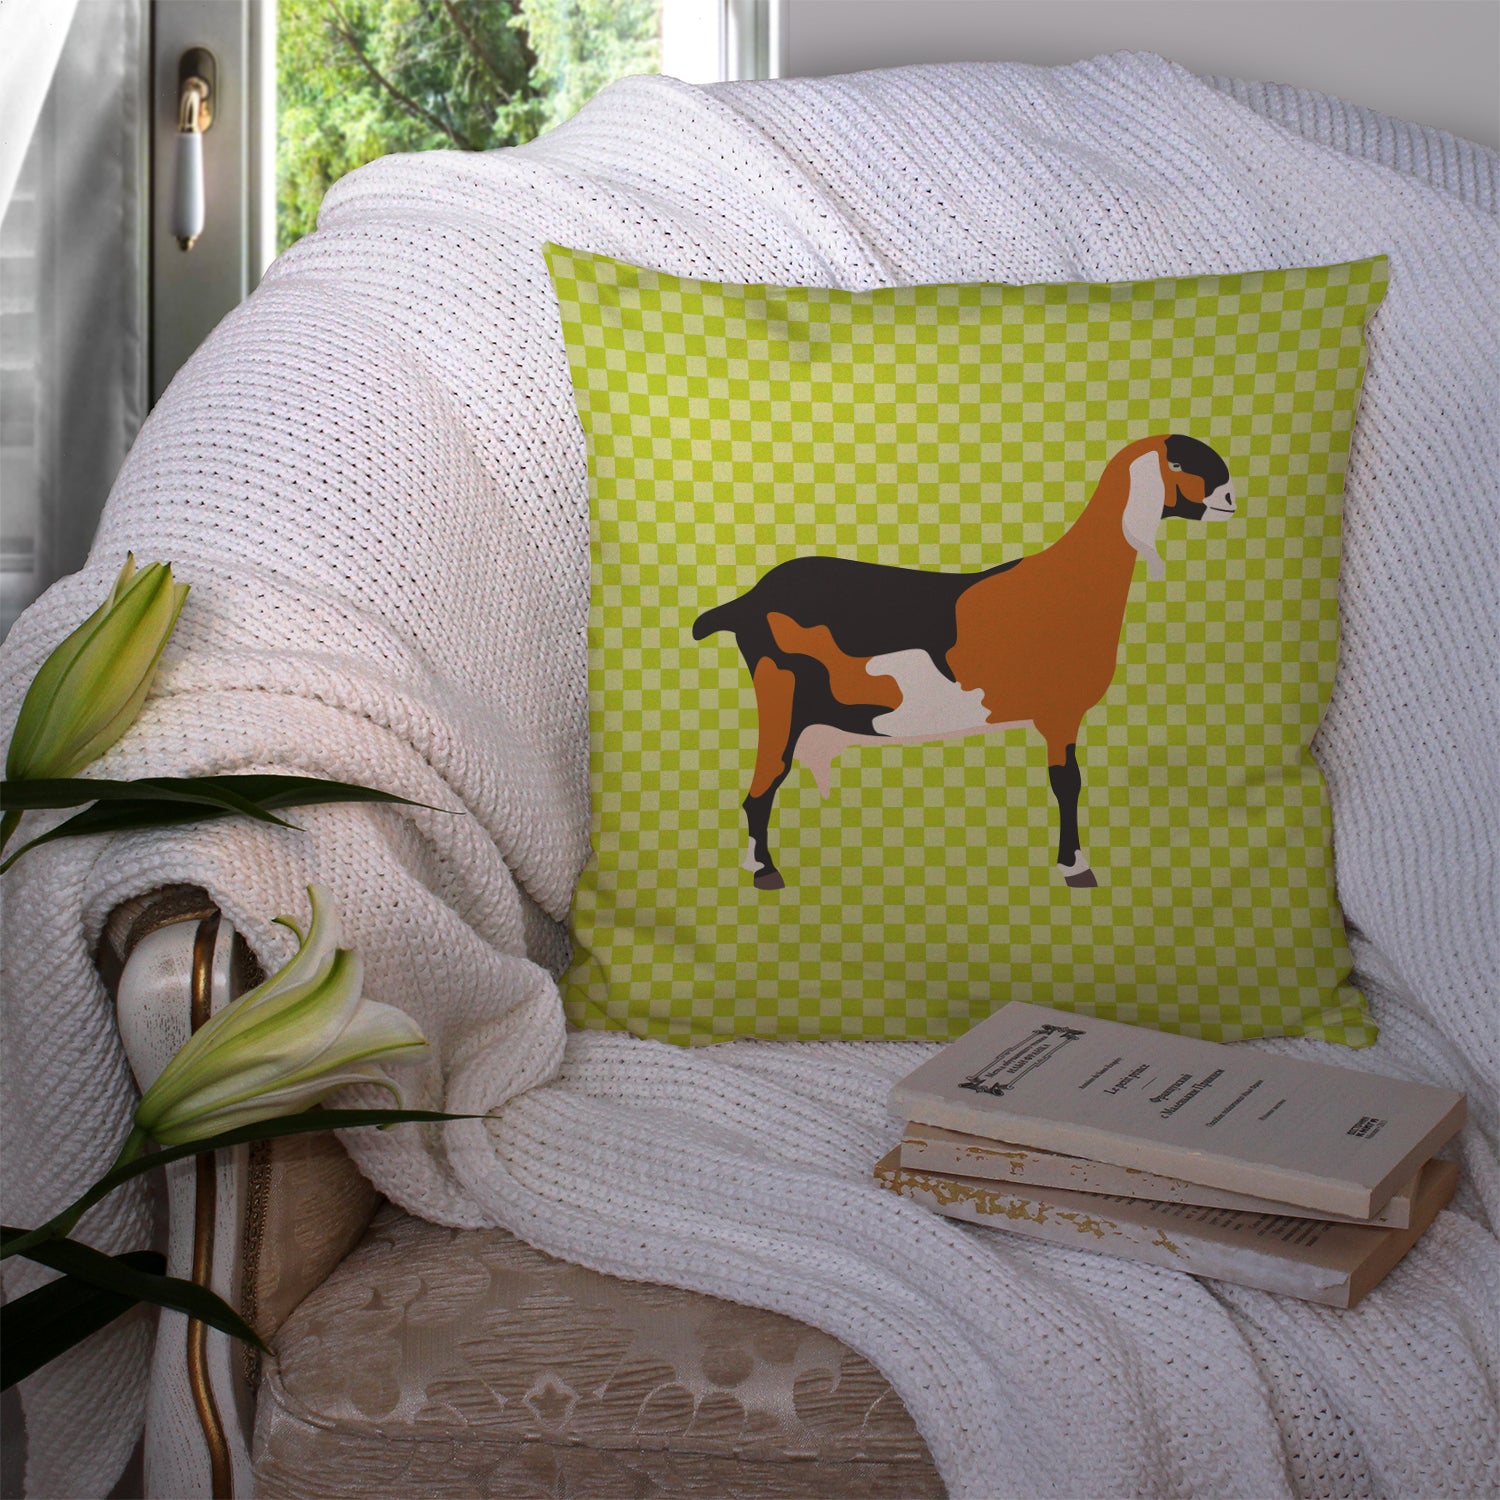 Anglo-nubian Nubian Goat Green Fabric Decorative Pillow BB7709PW1414 - the-store.com